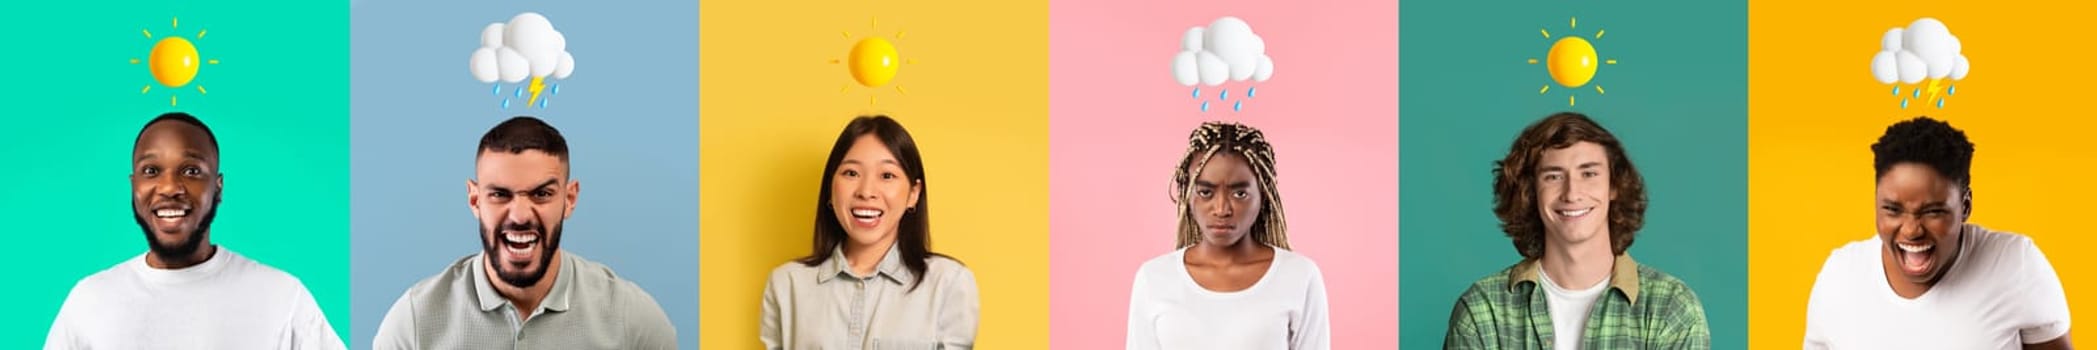 Diverse Multiethnic People With Weather Emojis Above Head Having Different Emotions